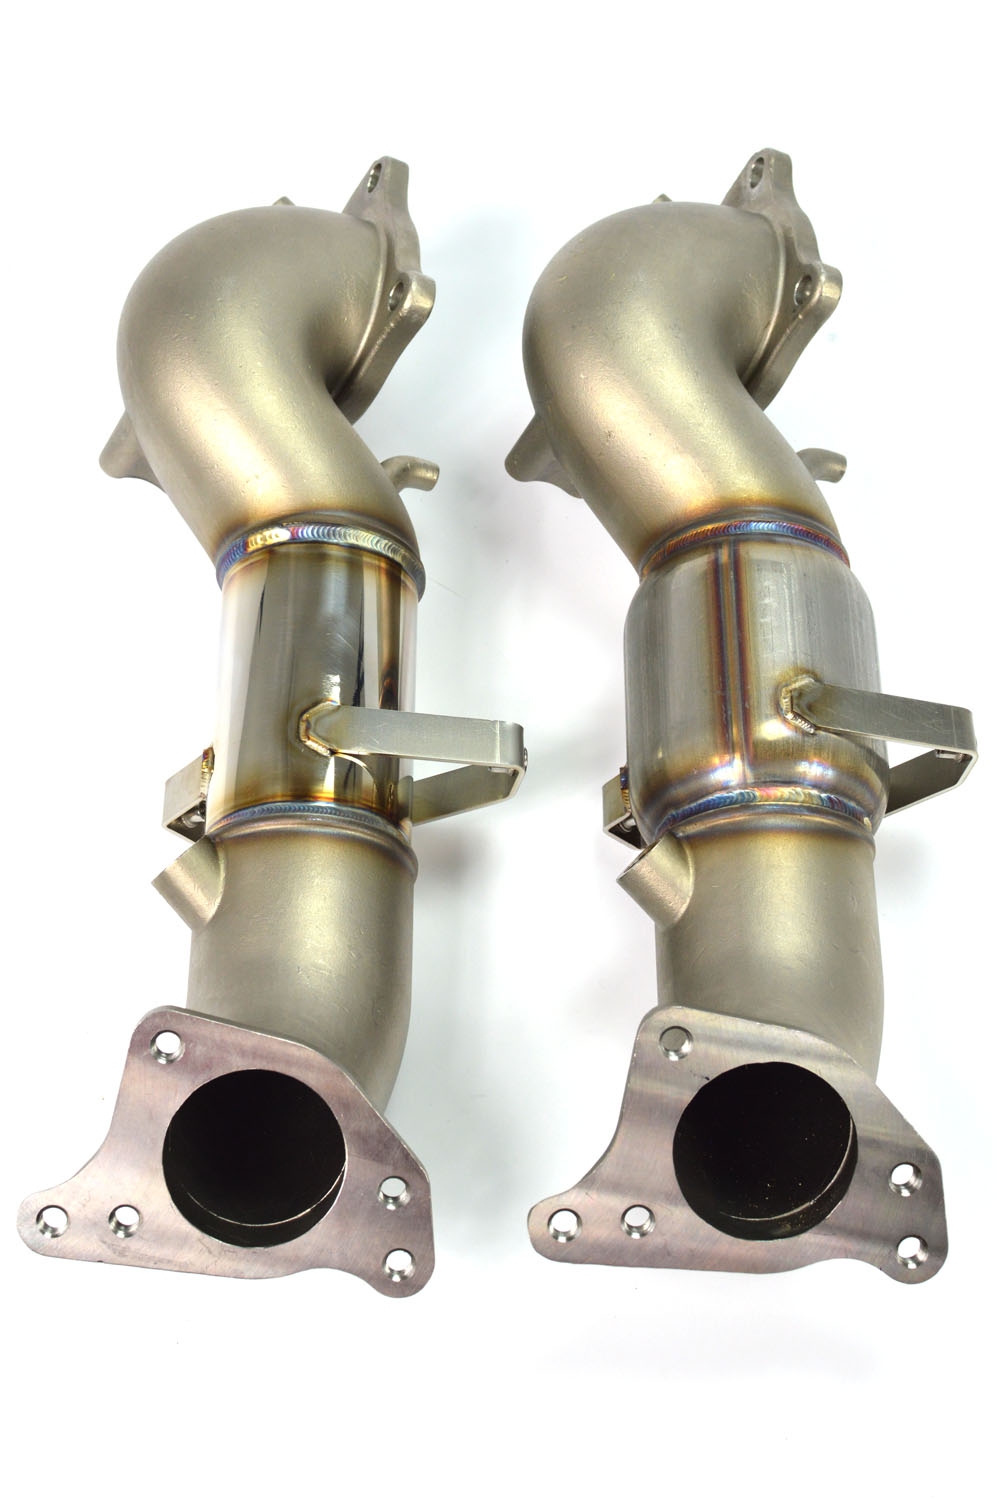 11th Gen Honda Civic 27WON 80mm down-pipe now available CivicX-Performance-Downpipe-2